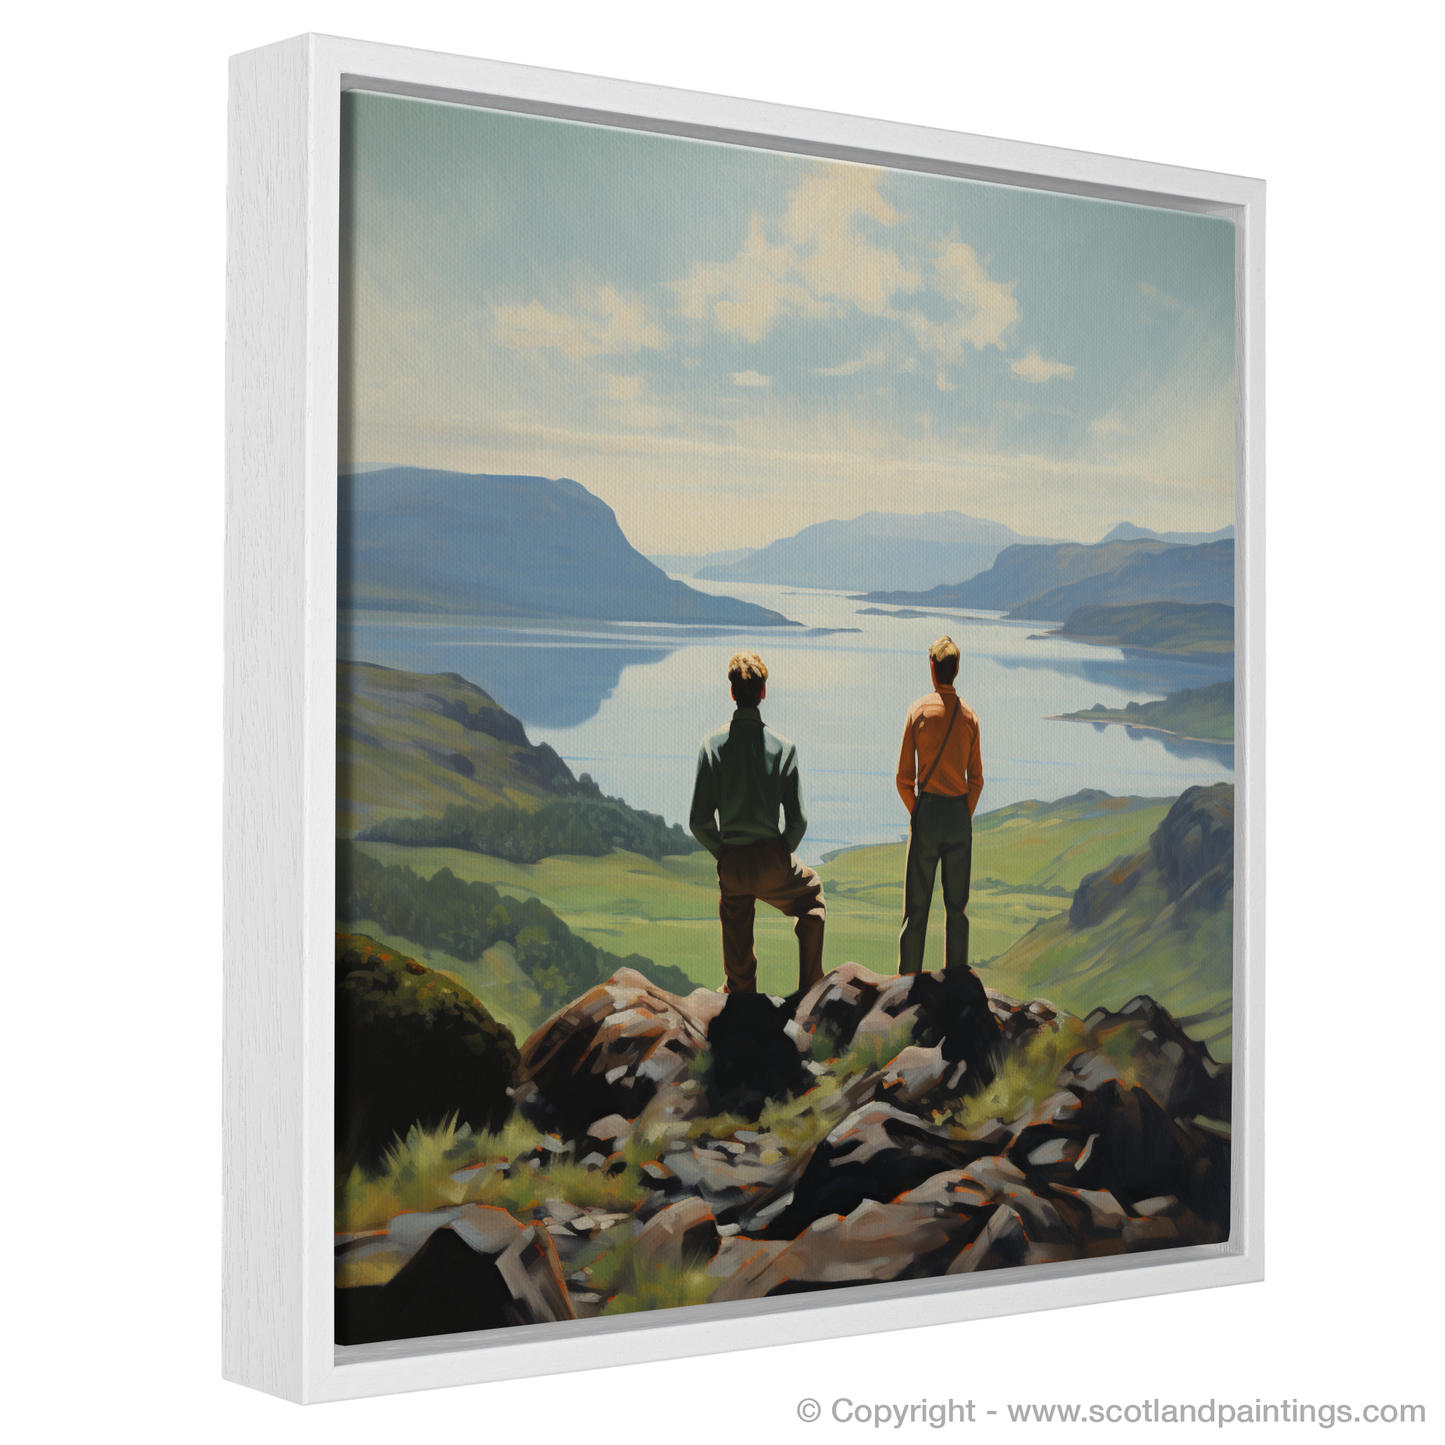 Painting and Art Print of Two hikers looking out on Loch Lomond entitled "Reflections on Loch Lomond: A Hiker's View".